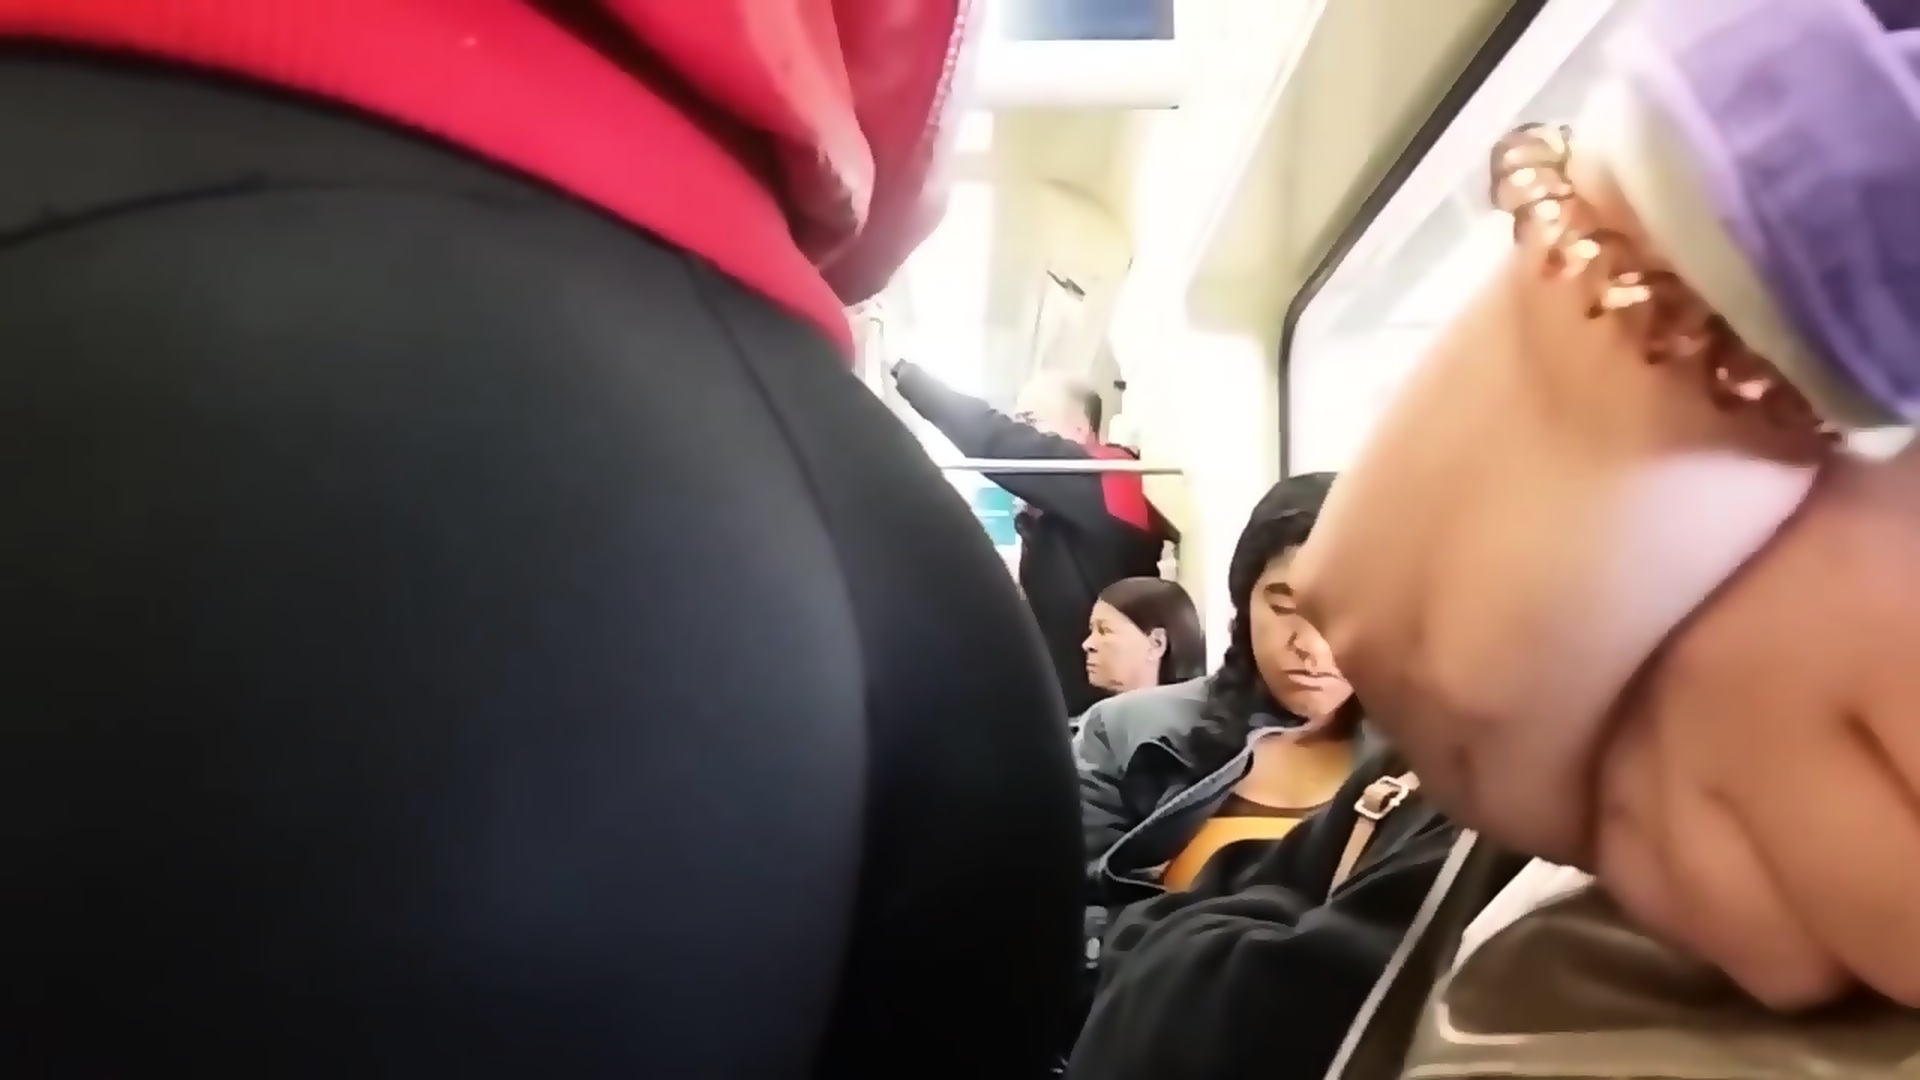 Tight Teen Ass In Spandex Leggings On The Train The Butt Eporner